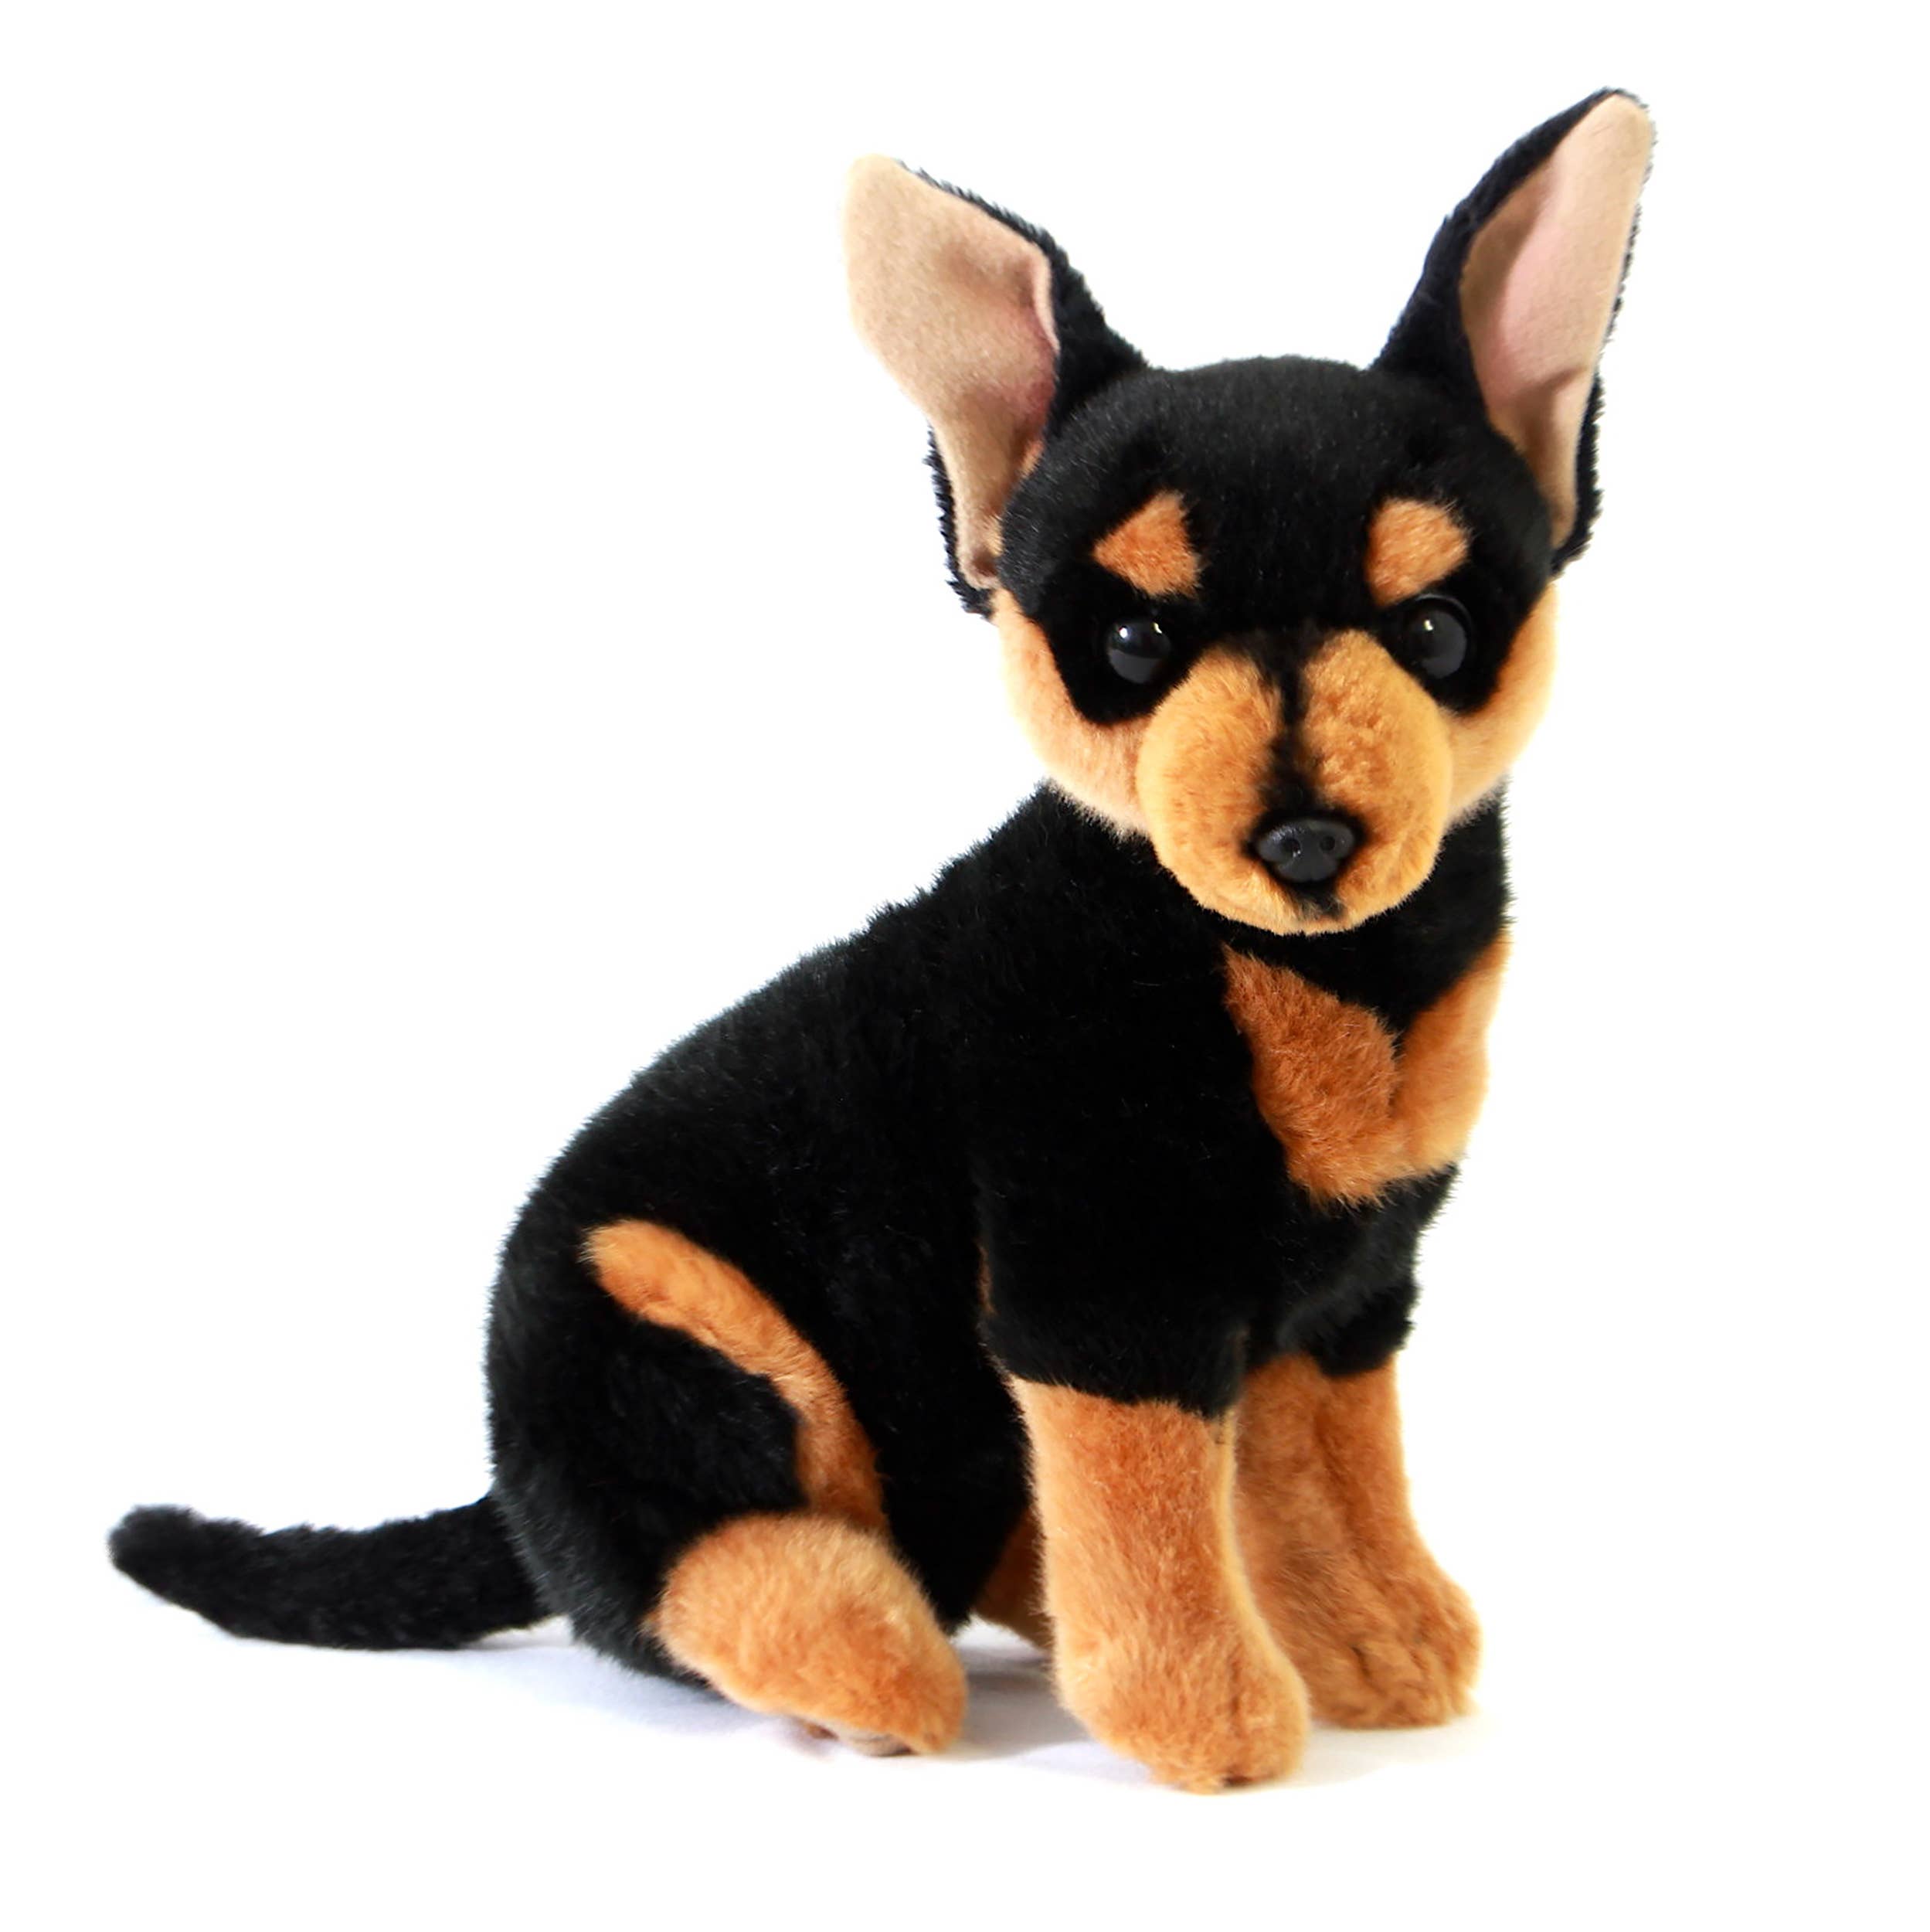 Plush Toy Stuffed Chihuahua Dog Black and Tan Size 25cm/10 – The